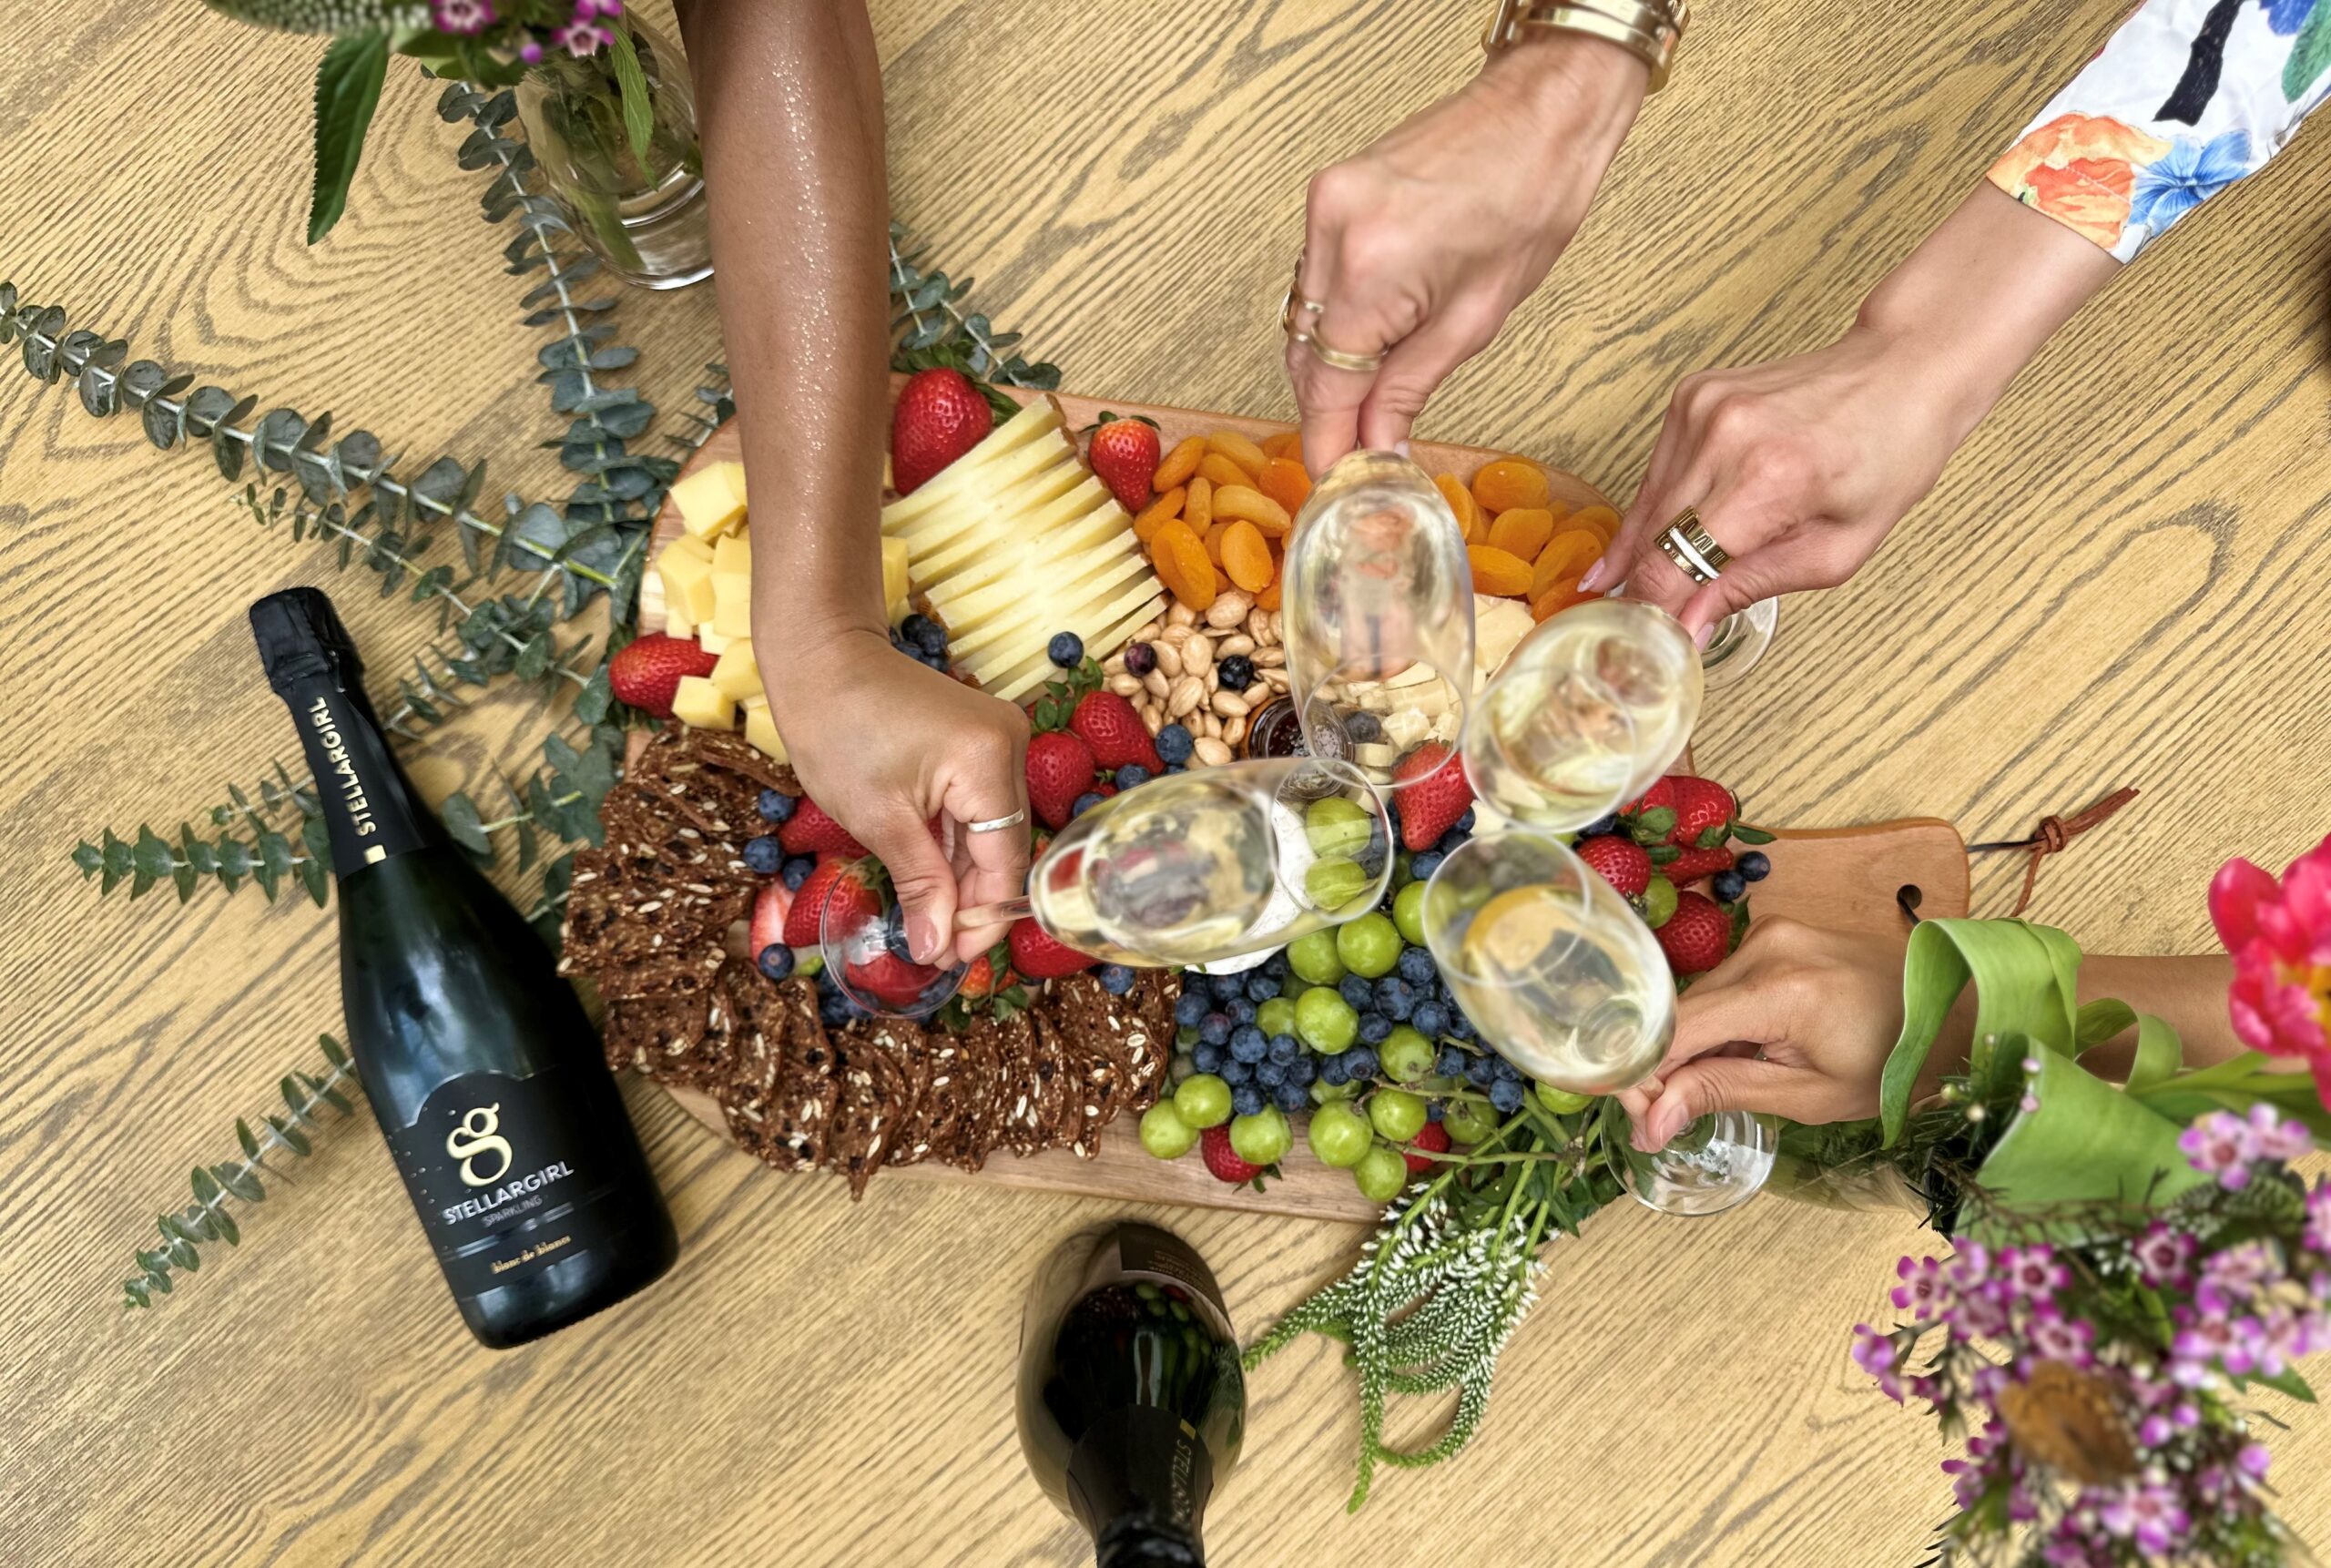 Group of ladies raising a glass of stellargirl champagne over a grazing board of snacks